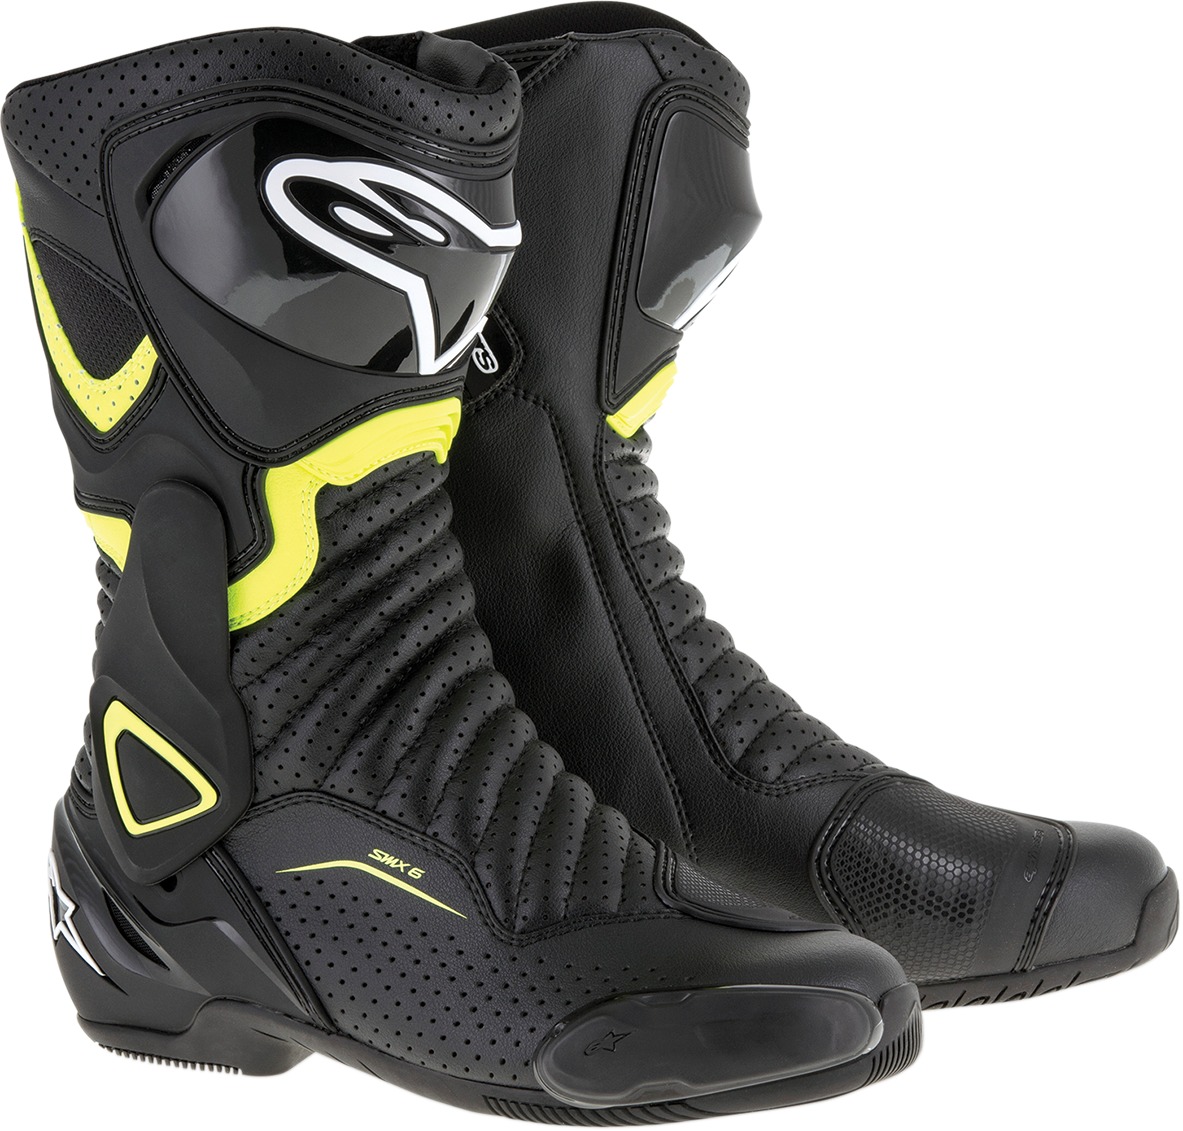 SMX-6v2 Vented Street Riding Boots Black/Yellow US 6 - Click Image to Close